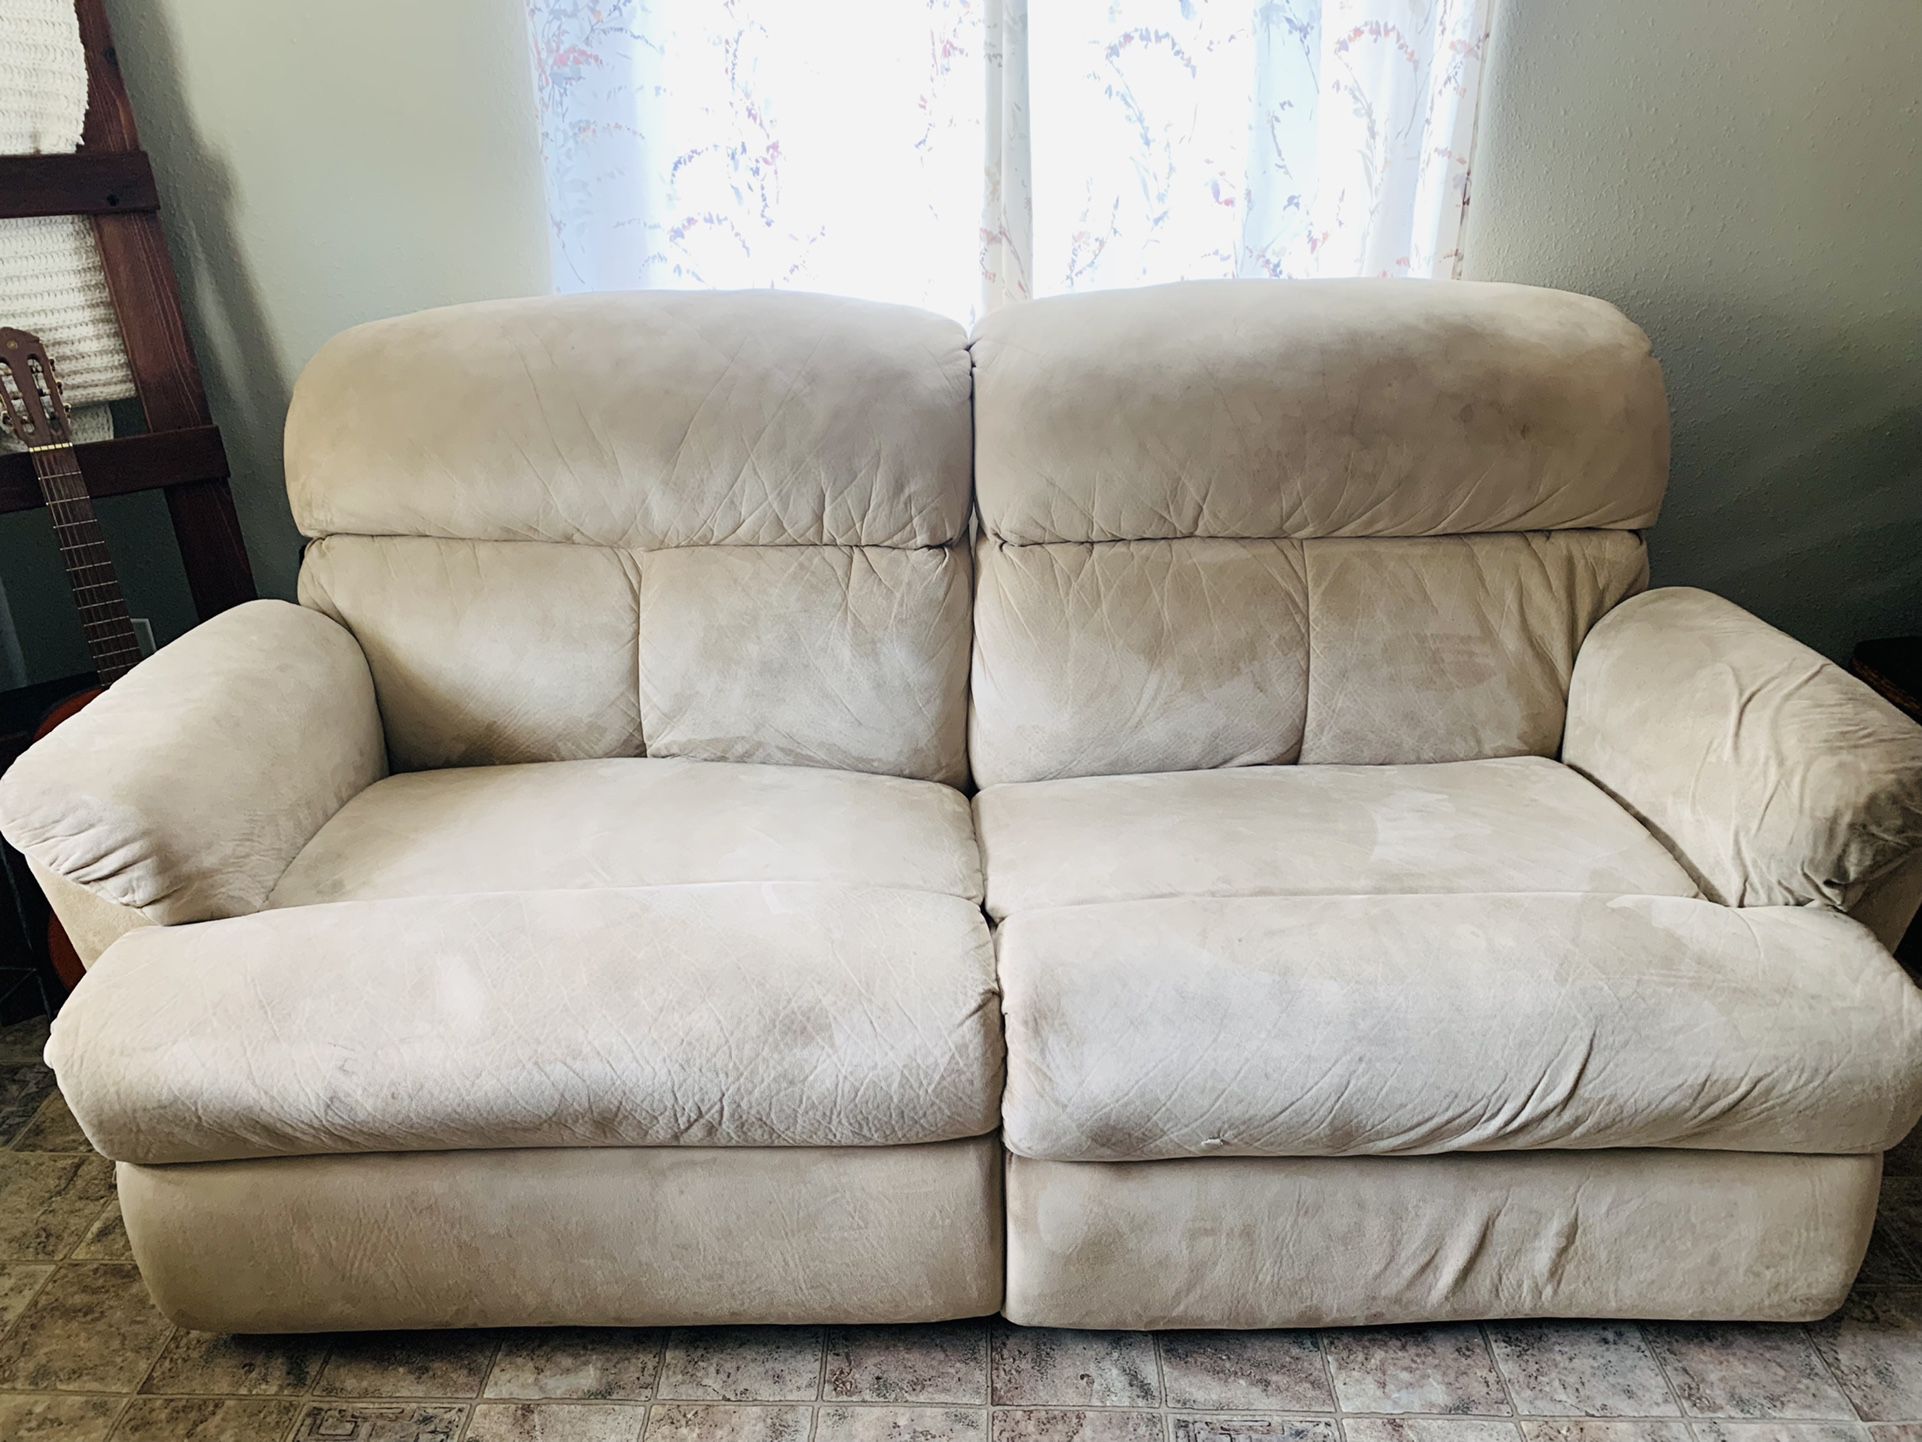 XL LOVE SEAT RECLINERS (Cream Color)